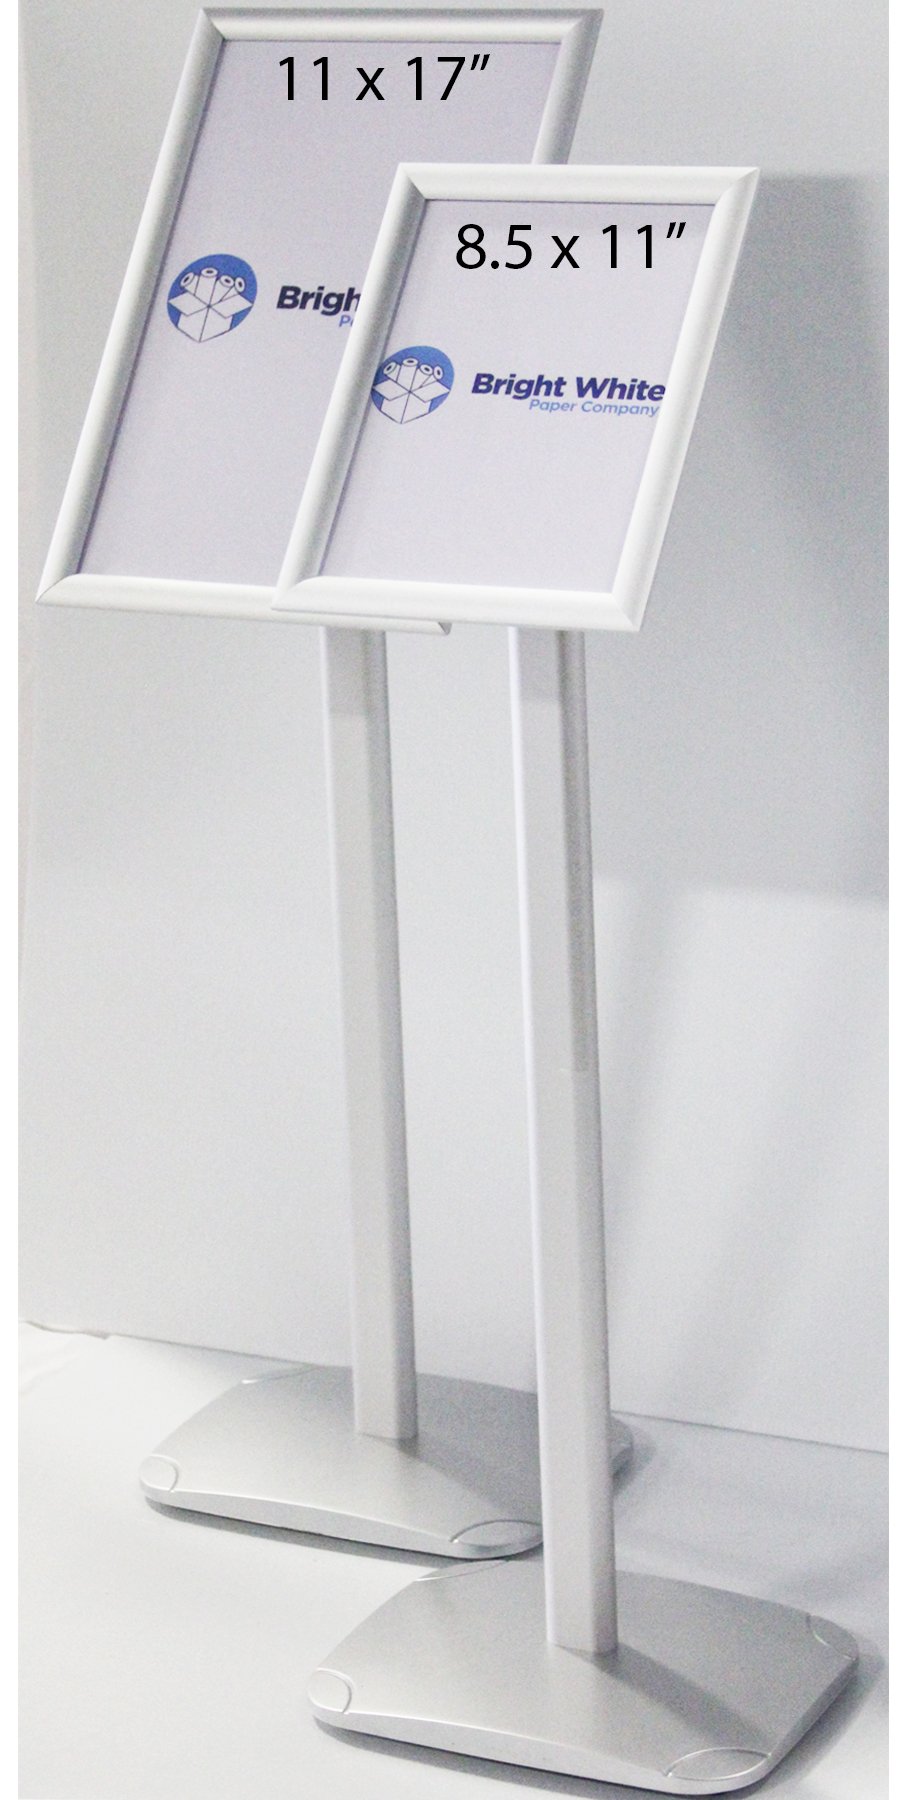 Bright White's Paper's Easy Stand Display